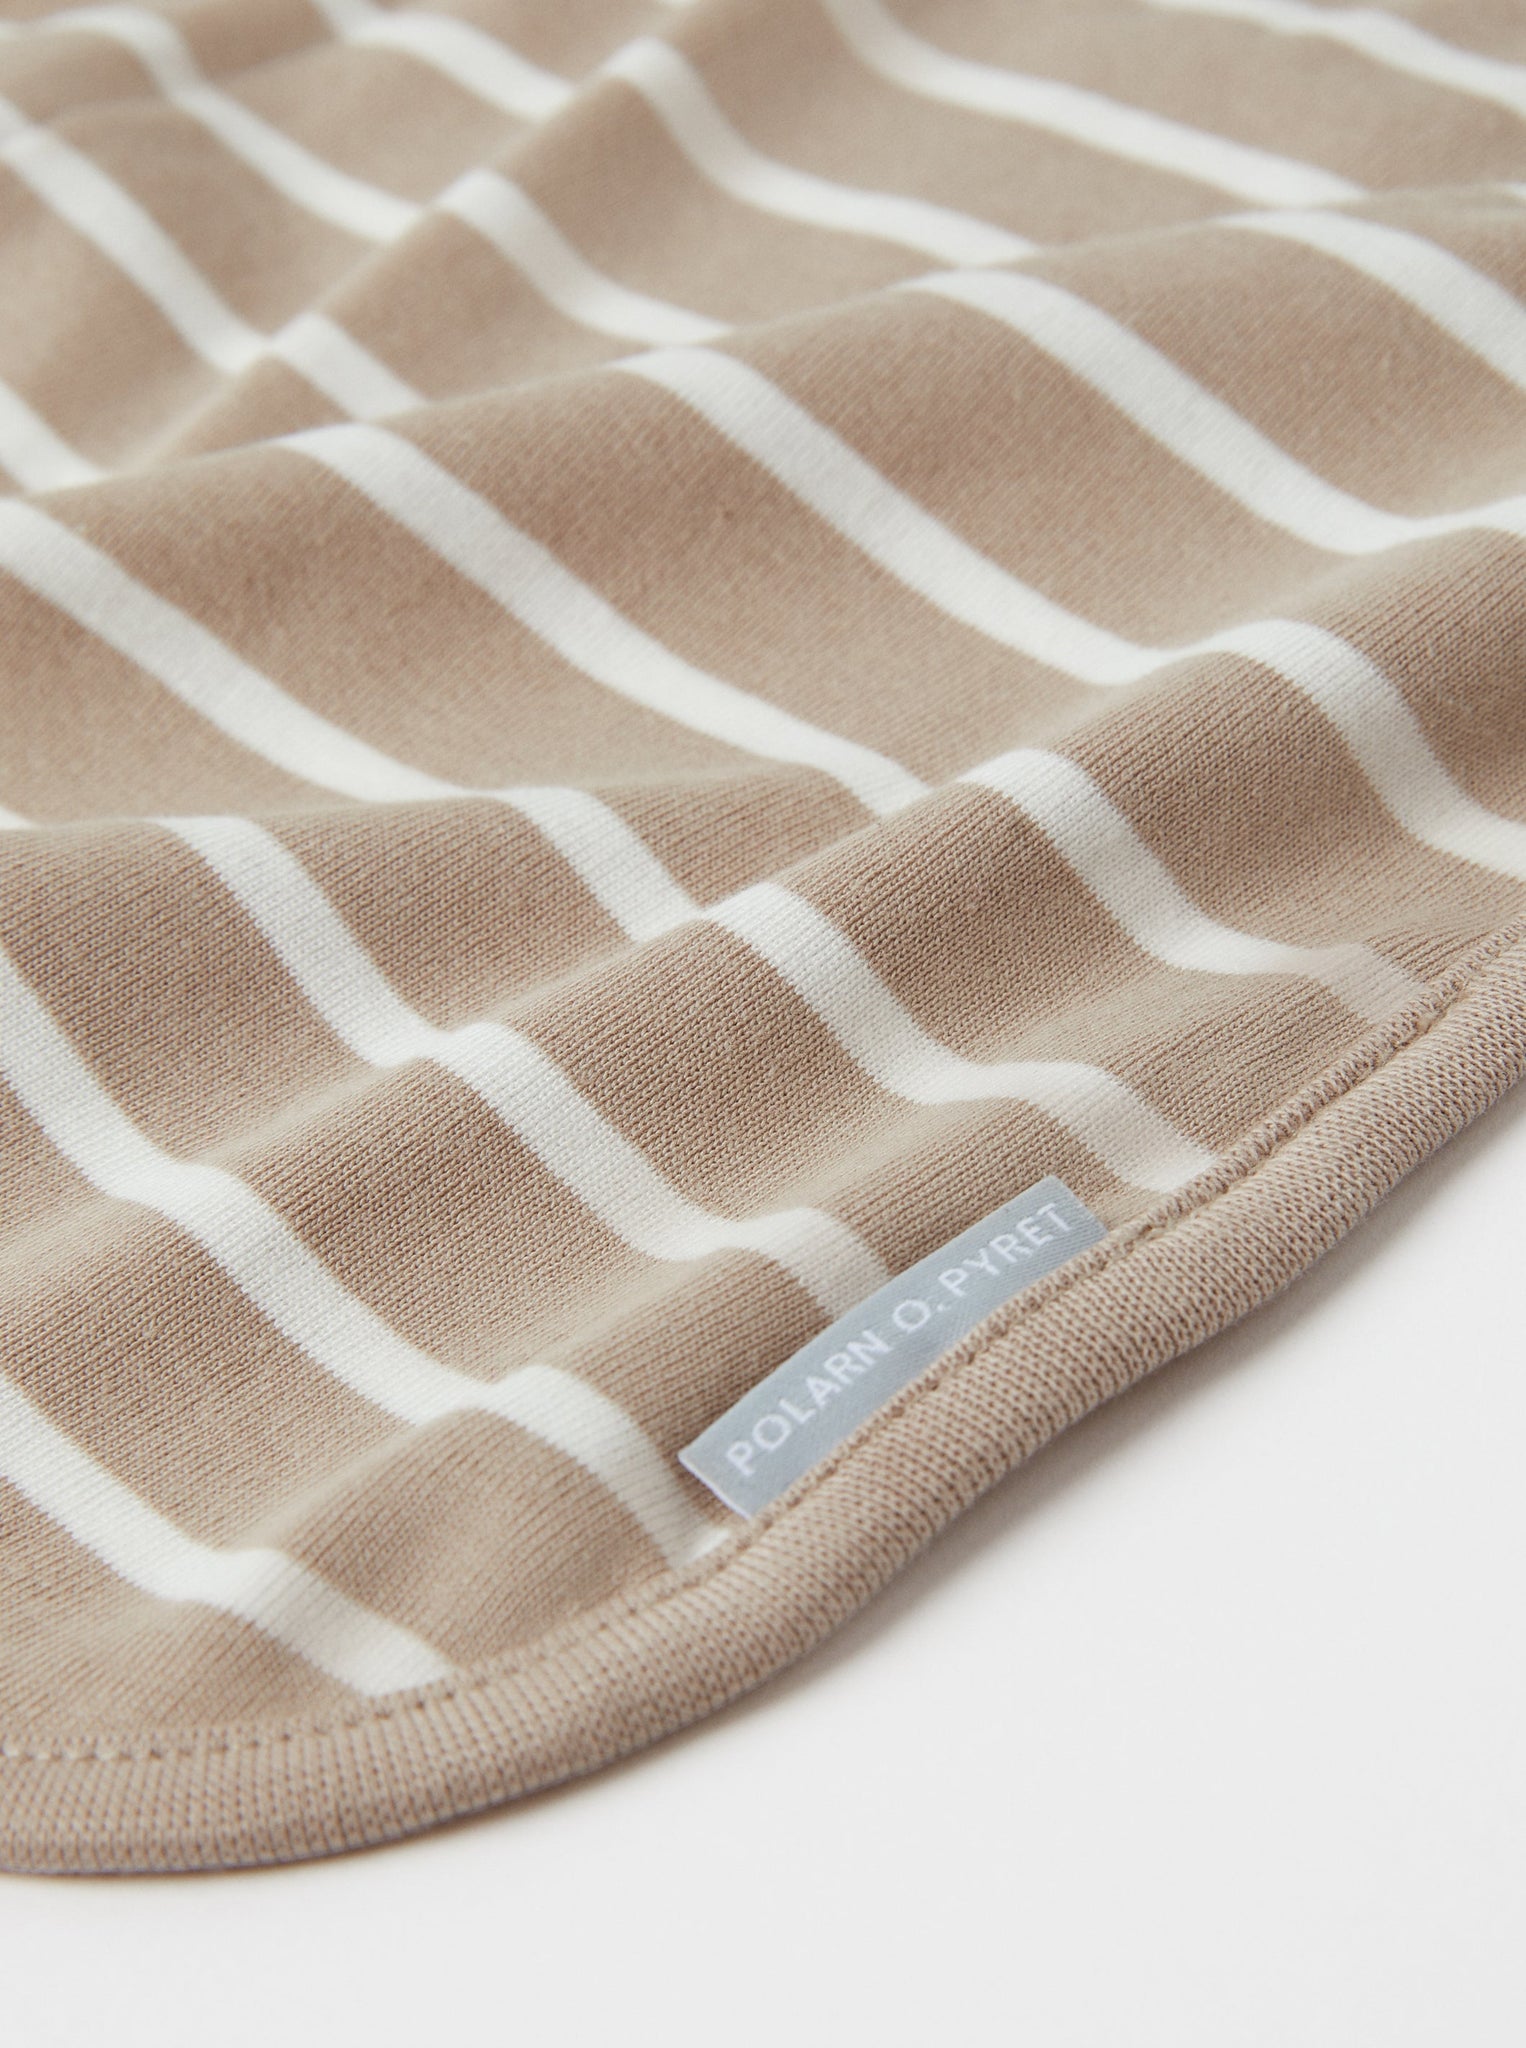 Striped Beige Baby Blanket from the Polarn O. Pyret babywear collection. Made using 100% GOTS Organic Cotton